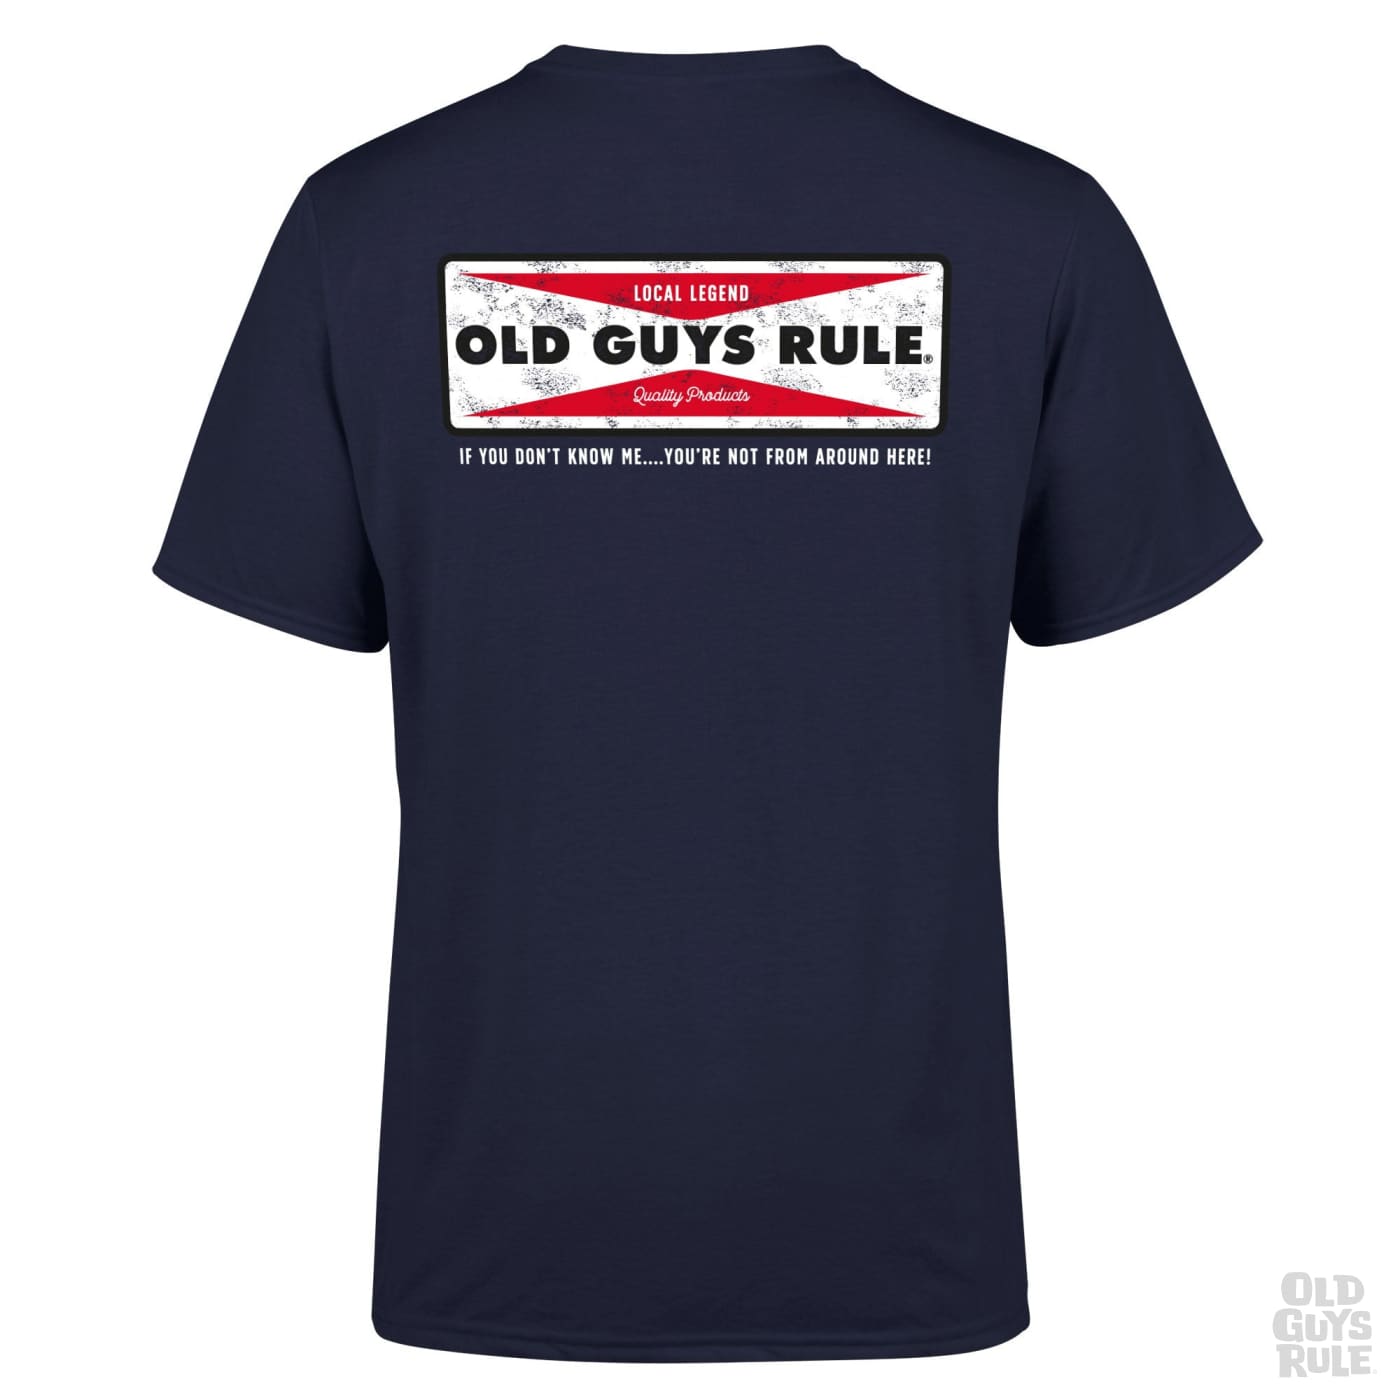 Old Guys Rule Local Legend IV T-Shirt - Navy